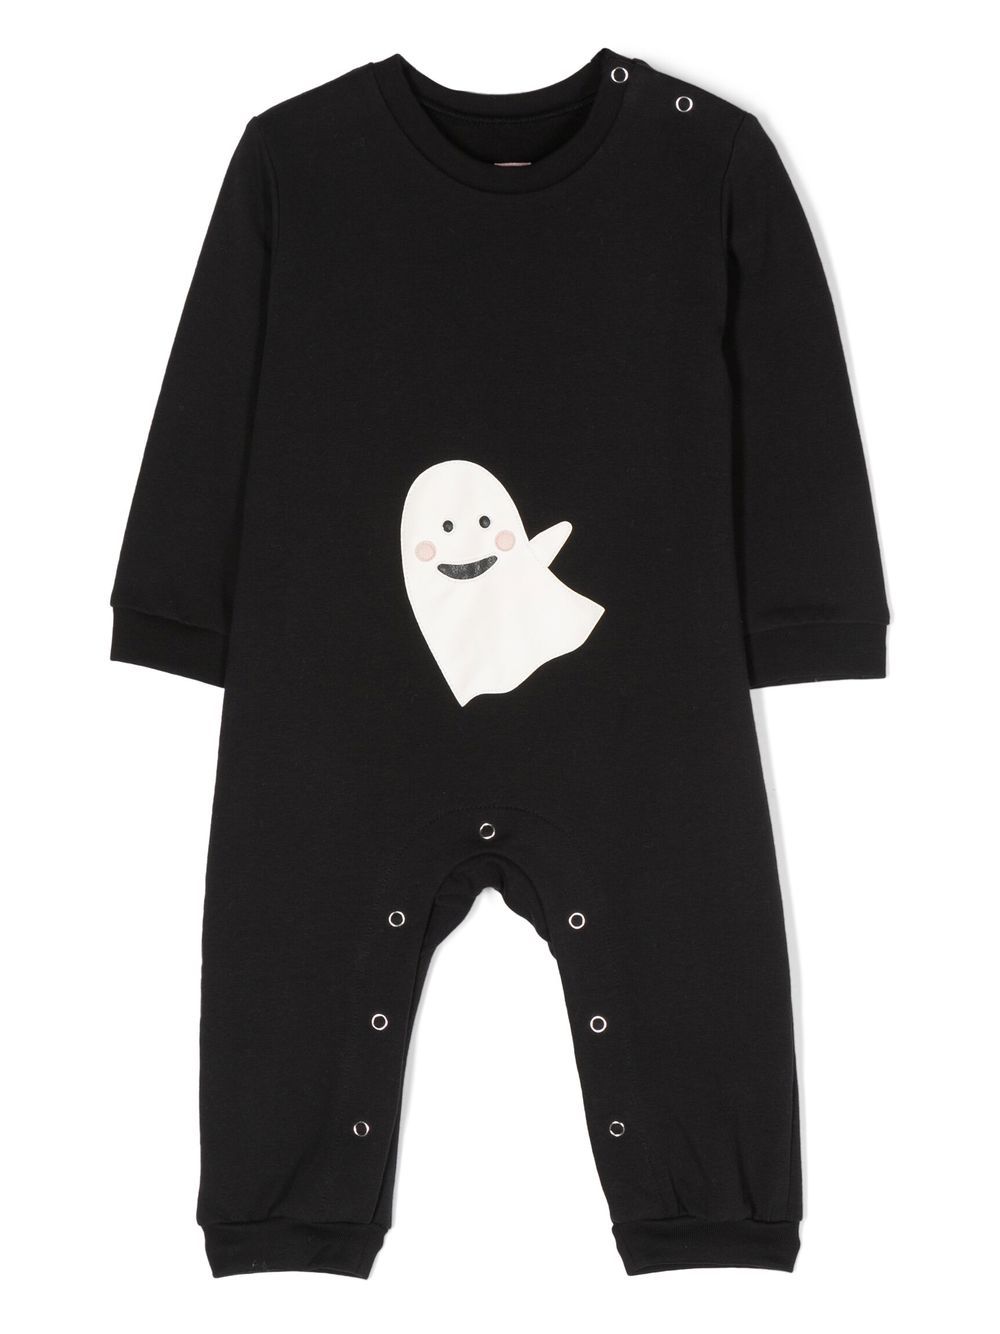 WAUW CAPOW by BANGBANG Baby Booh long-sleeved bodie - Black von WAUW CAPOW by BANGBANG